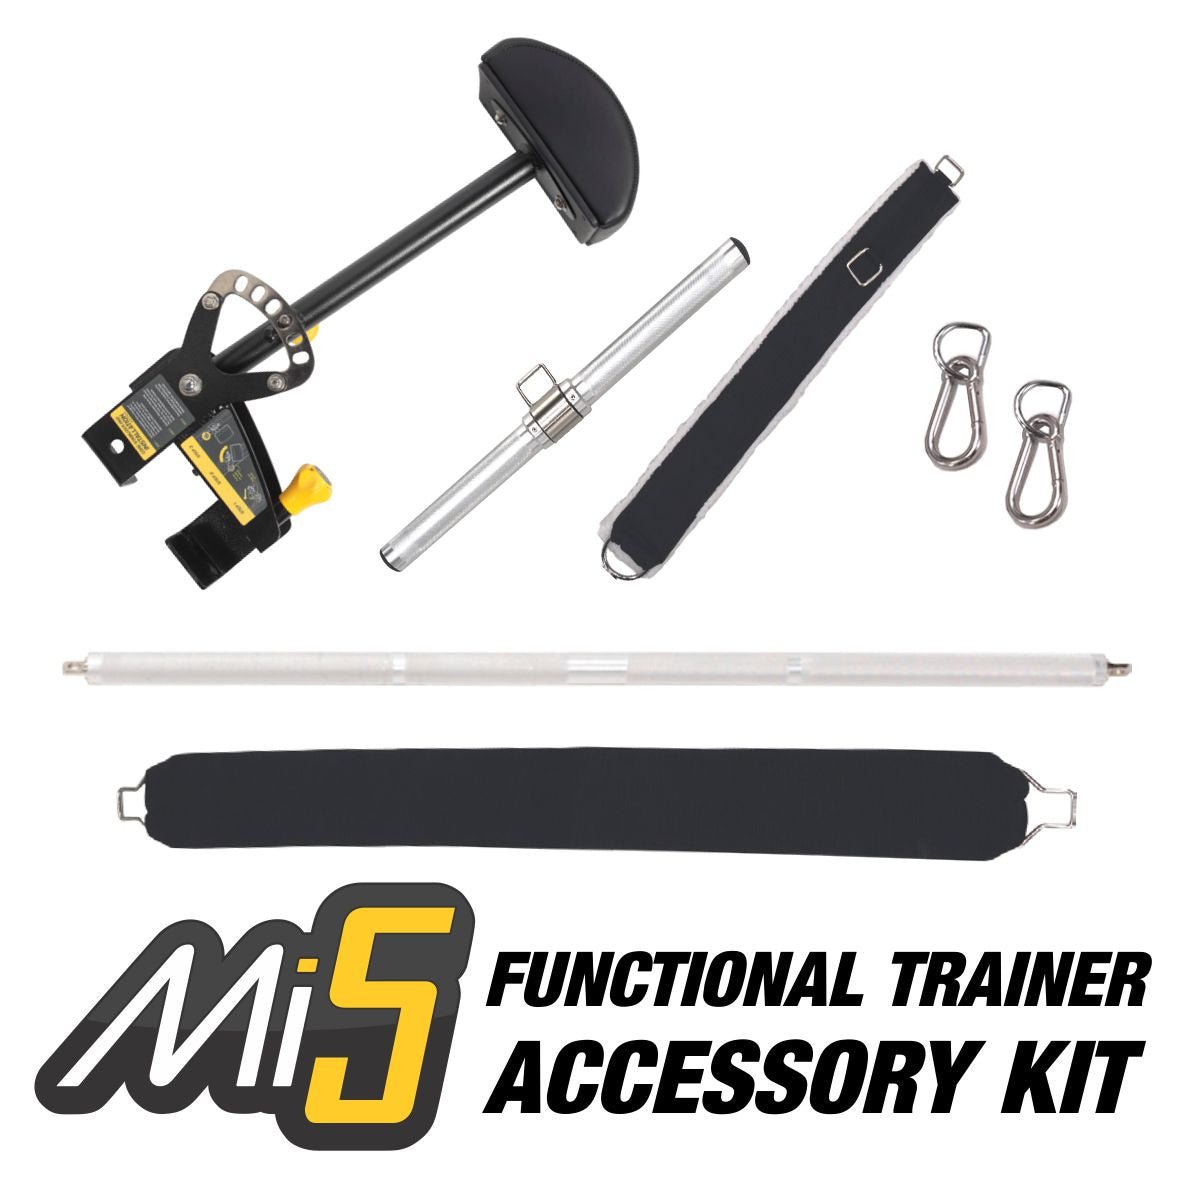 Hoist Fitness Mi5 Functional Trainer System accessory kit | Fitness Experience